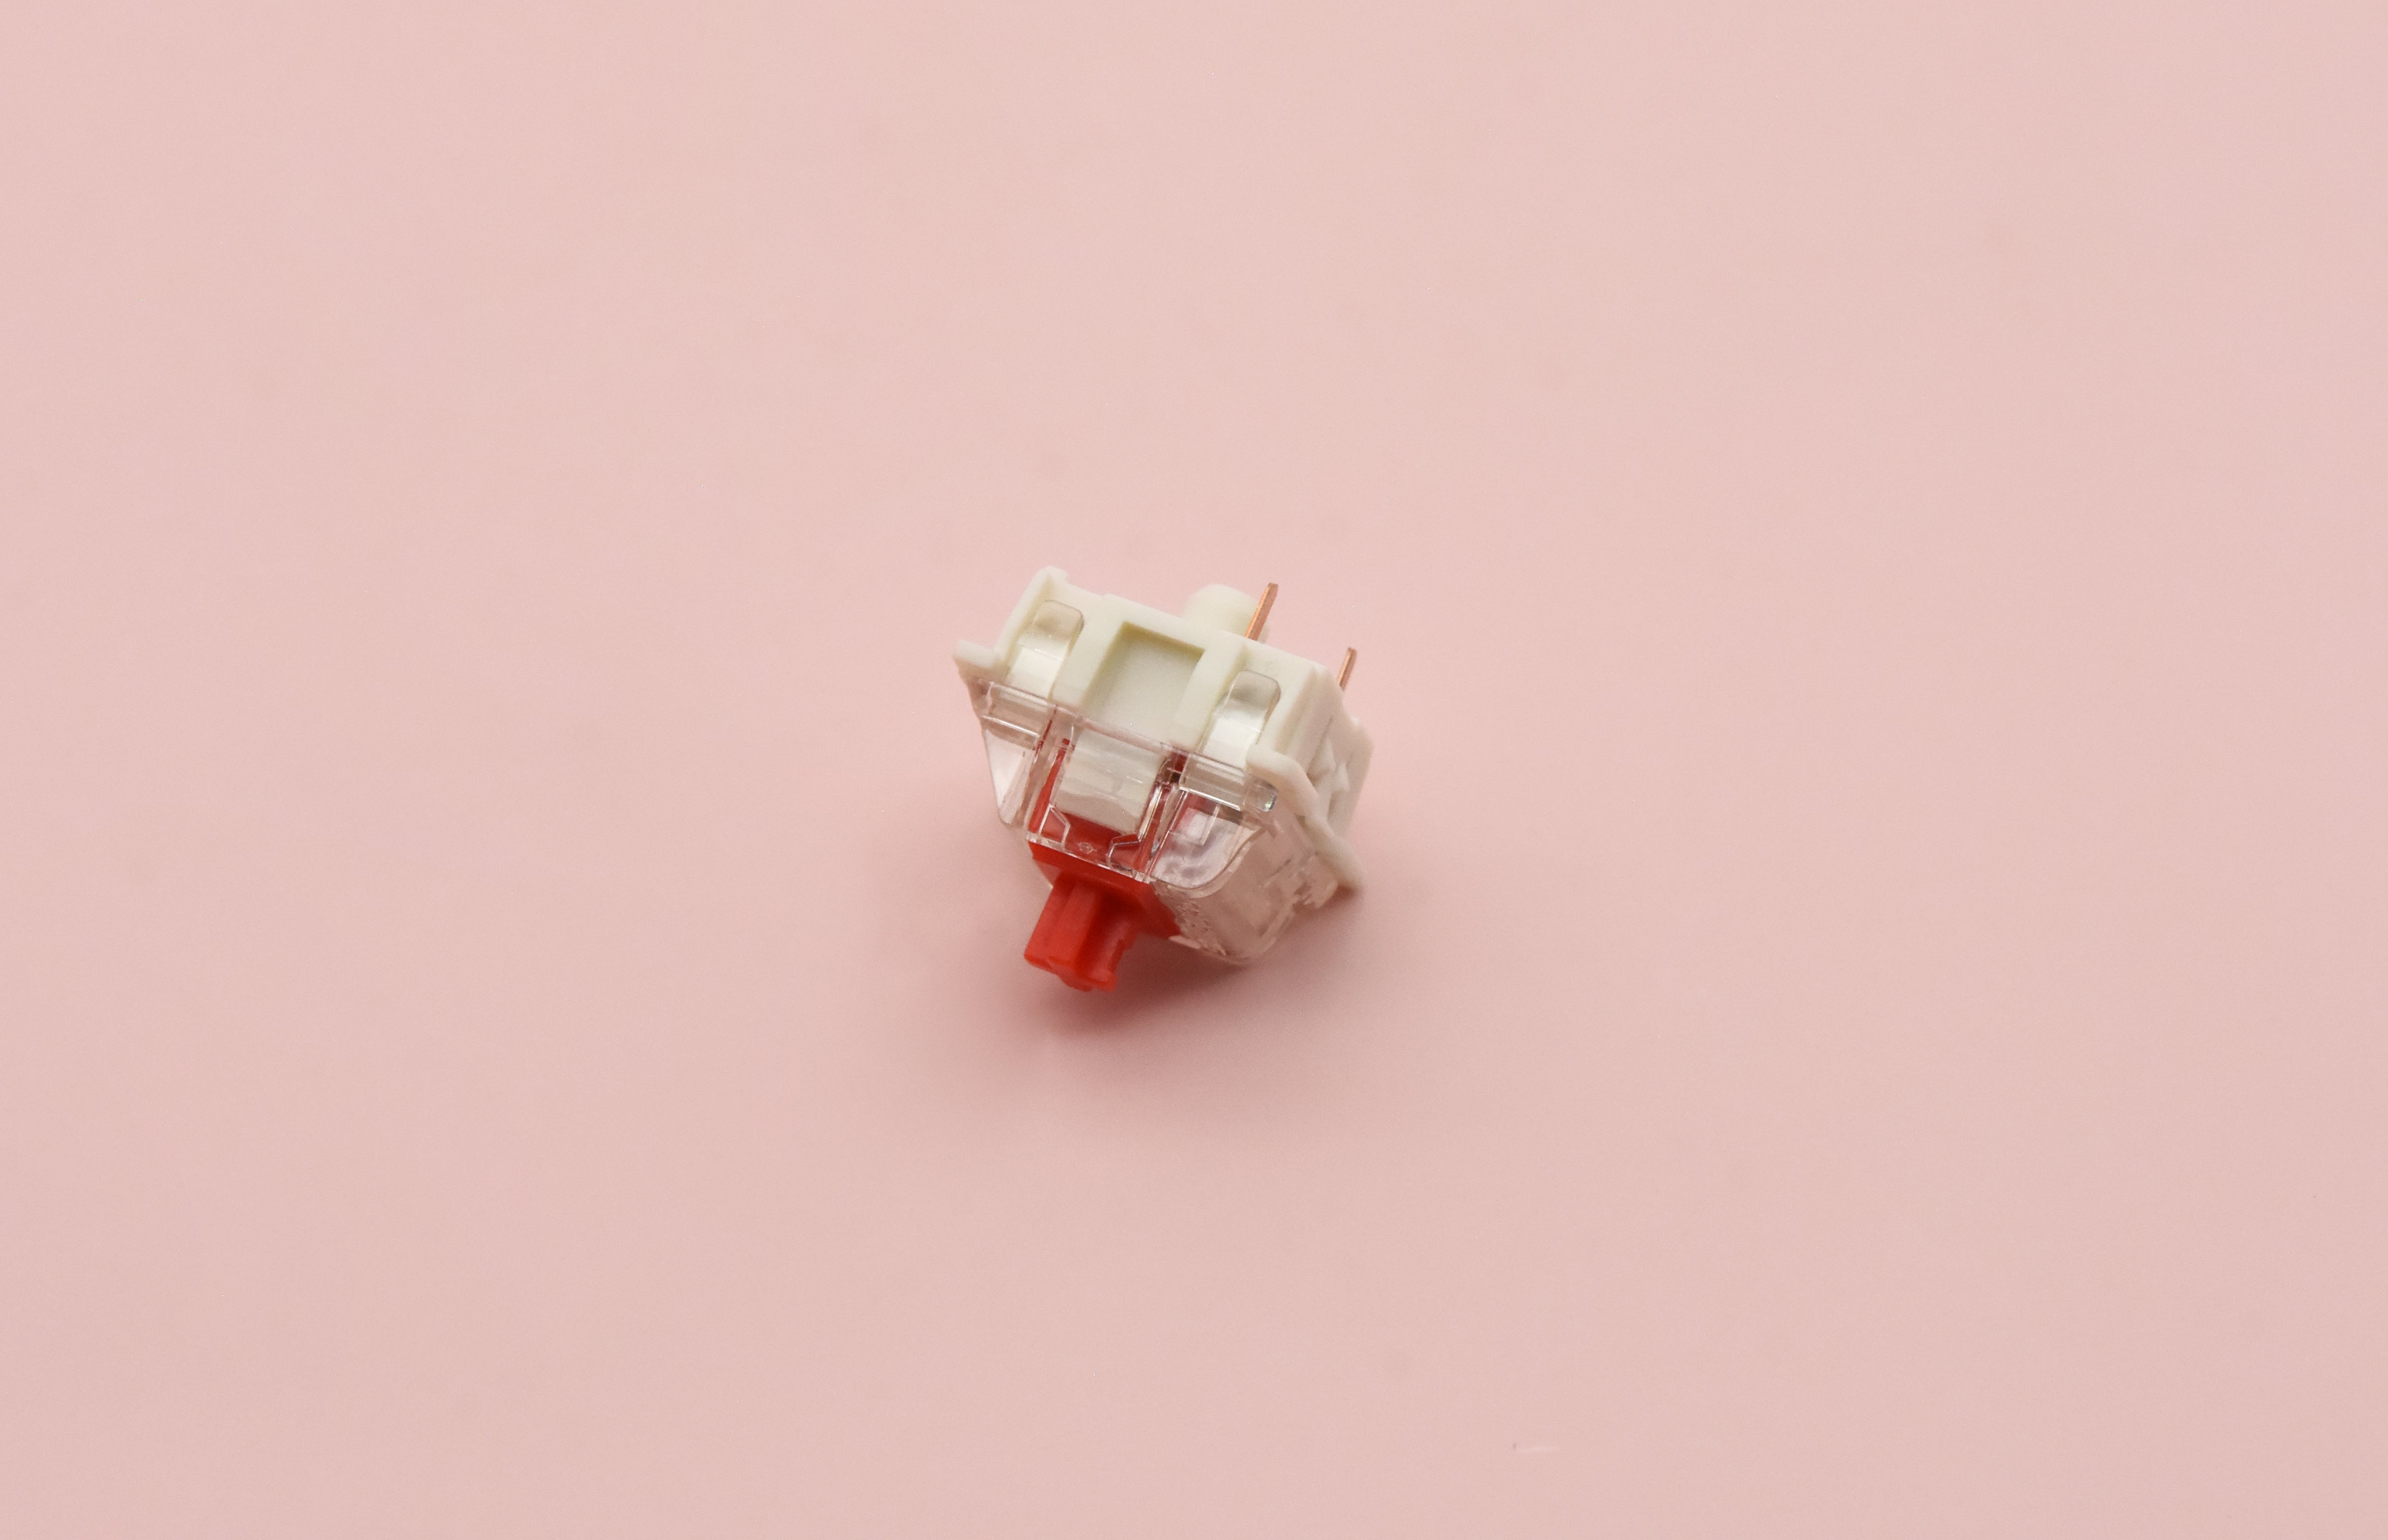 GATERON G PRO 3.0 RED LINEAR SWITCH FACTORY LUBED EDITION (10PCS)